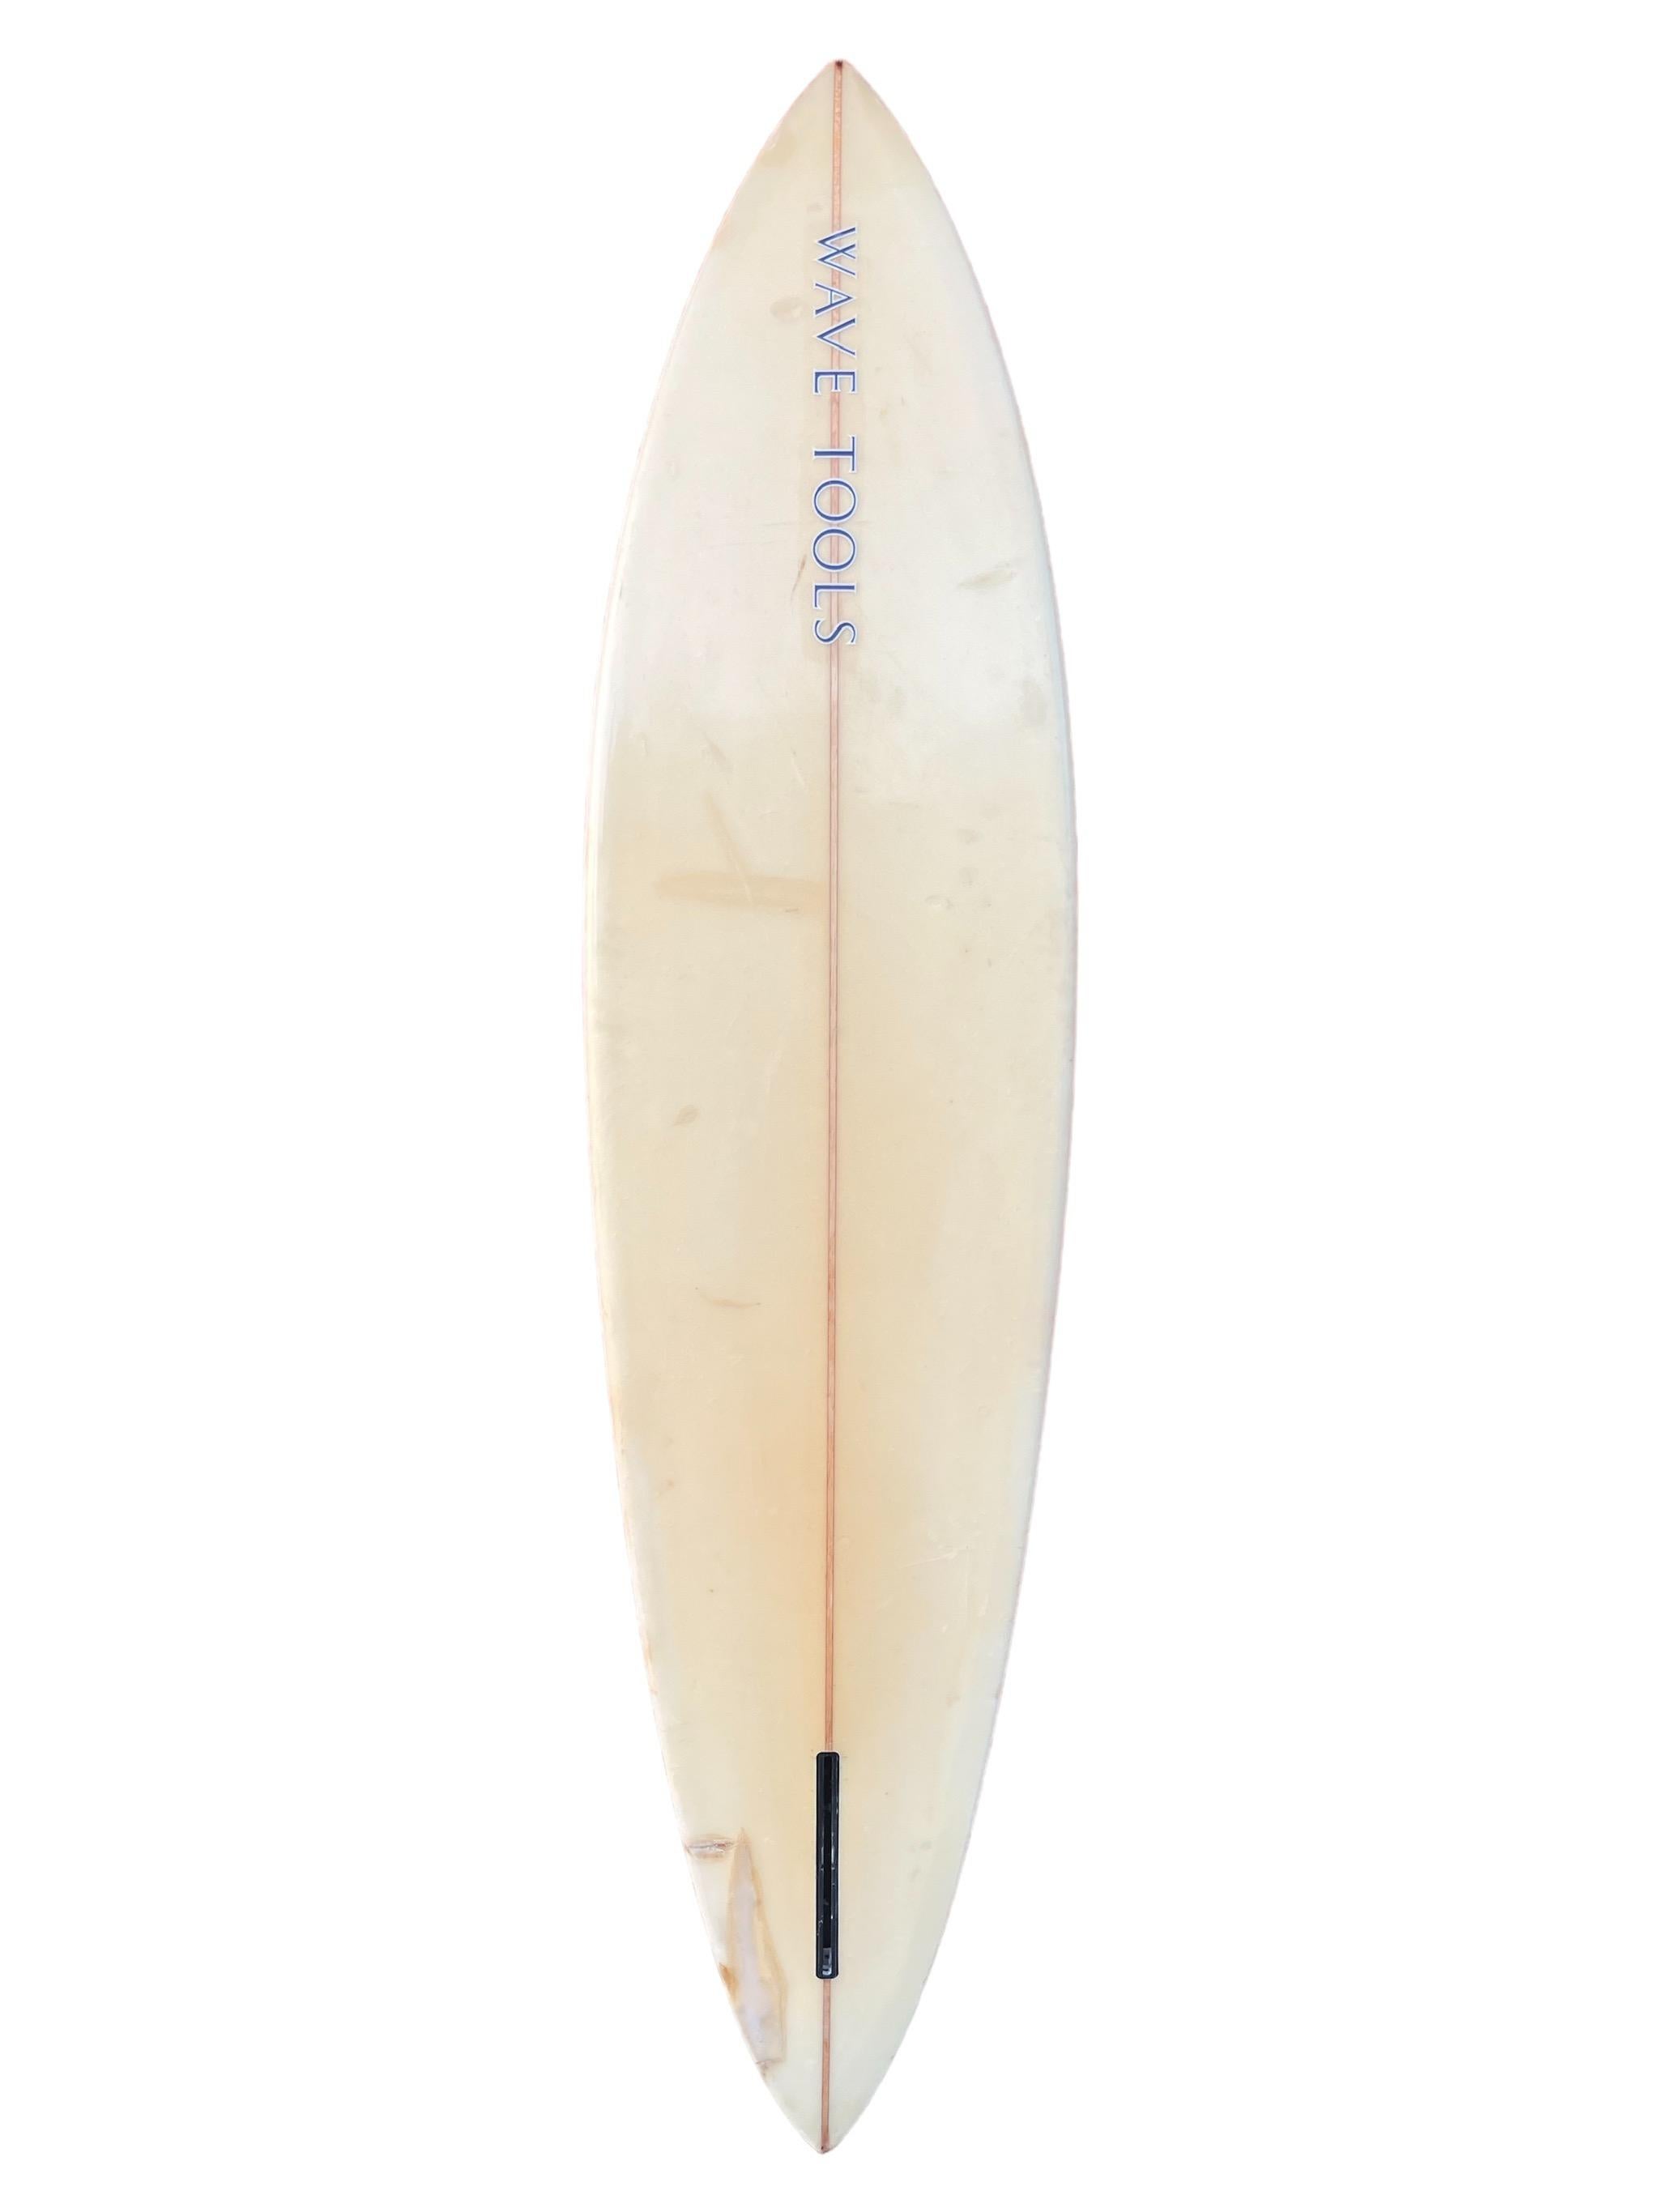 Late-1970s Wave Tools surfboard made by Lance Collins. Features sea-foam blue tinted deck with pinstriping. Pintail shape design. Signed by Lance Collins. A great example of an original 1970s vintage Wave Tools surfboard. 